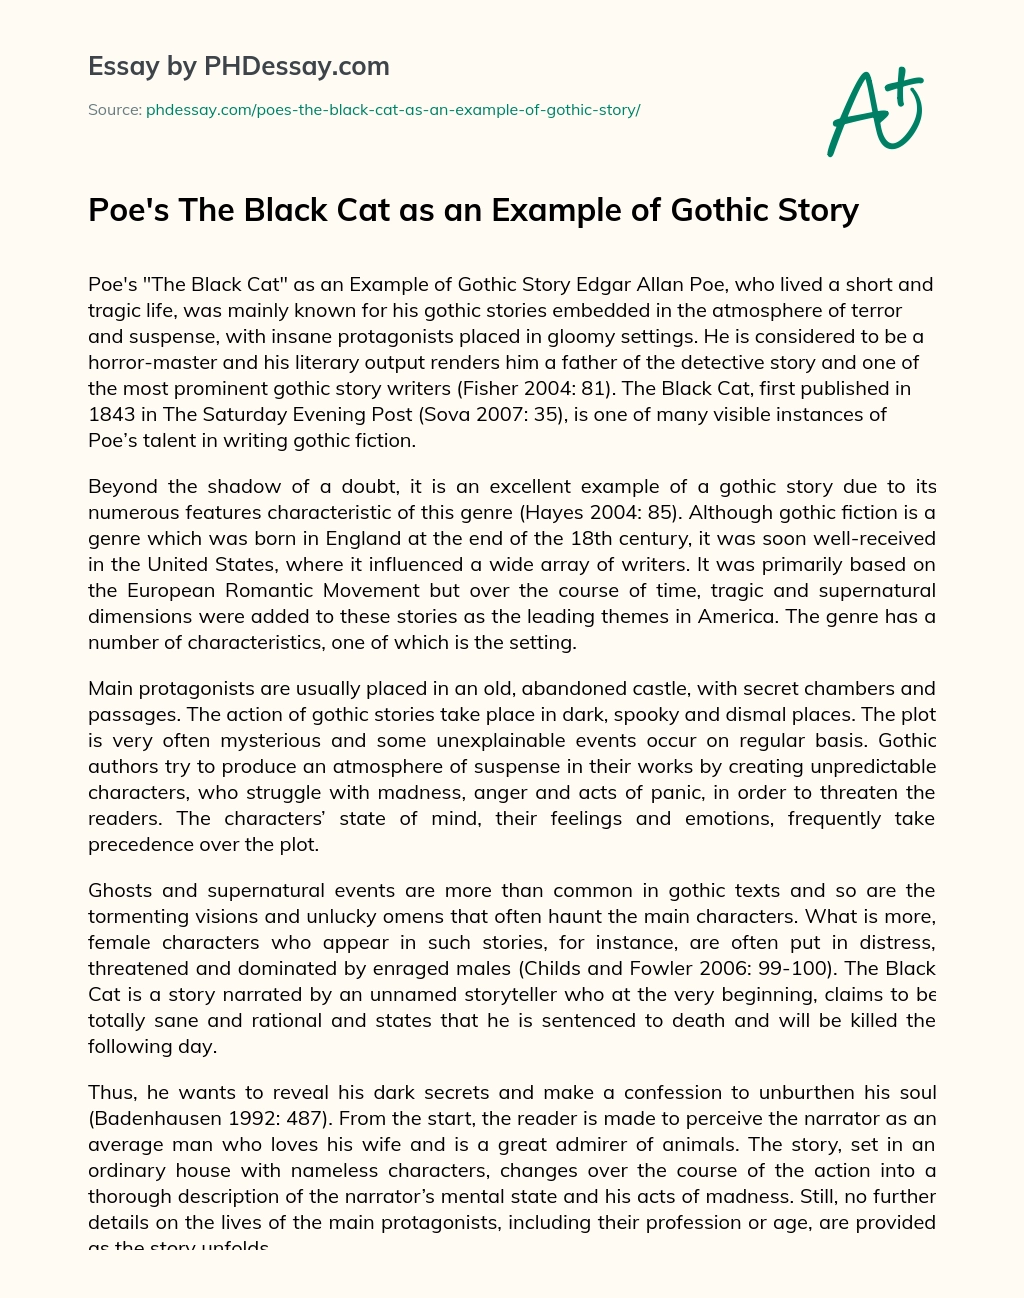 Poe’s The Black Cat as an Example of Gothic Story essay